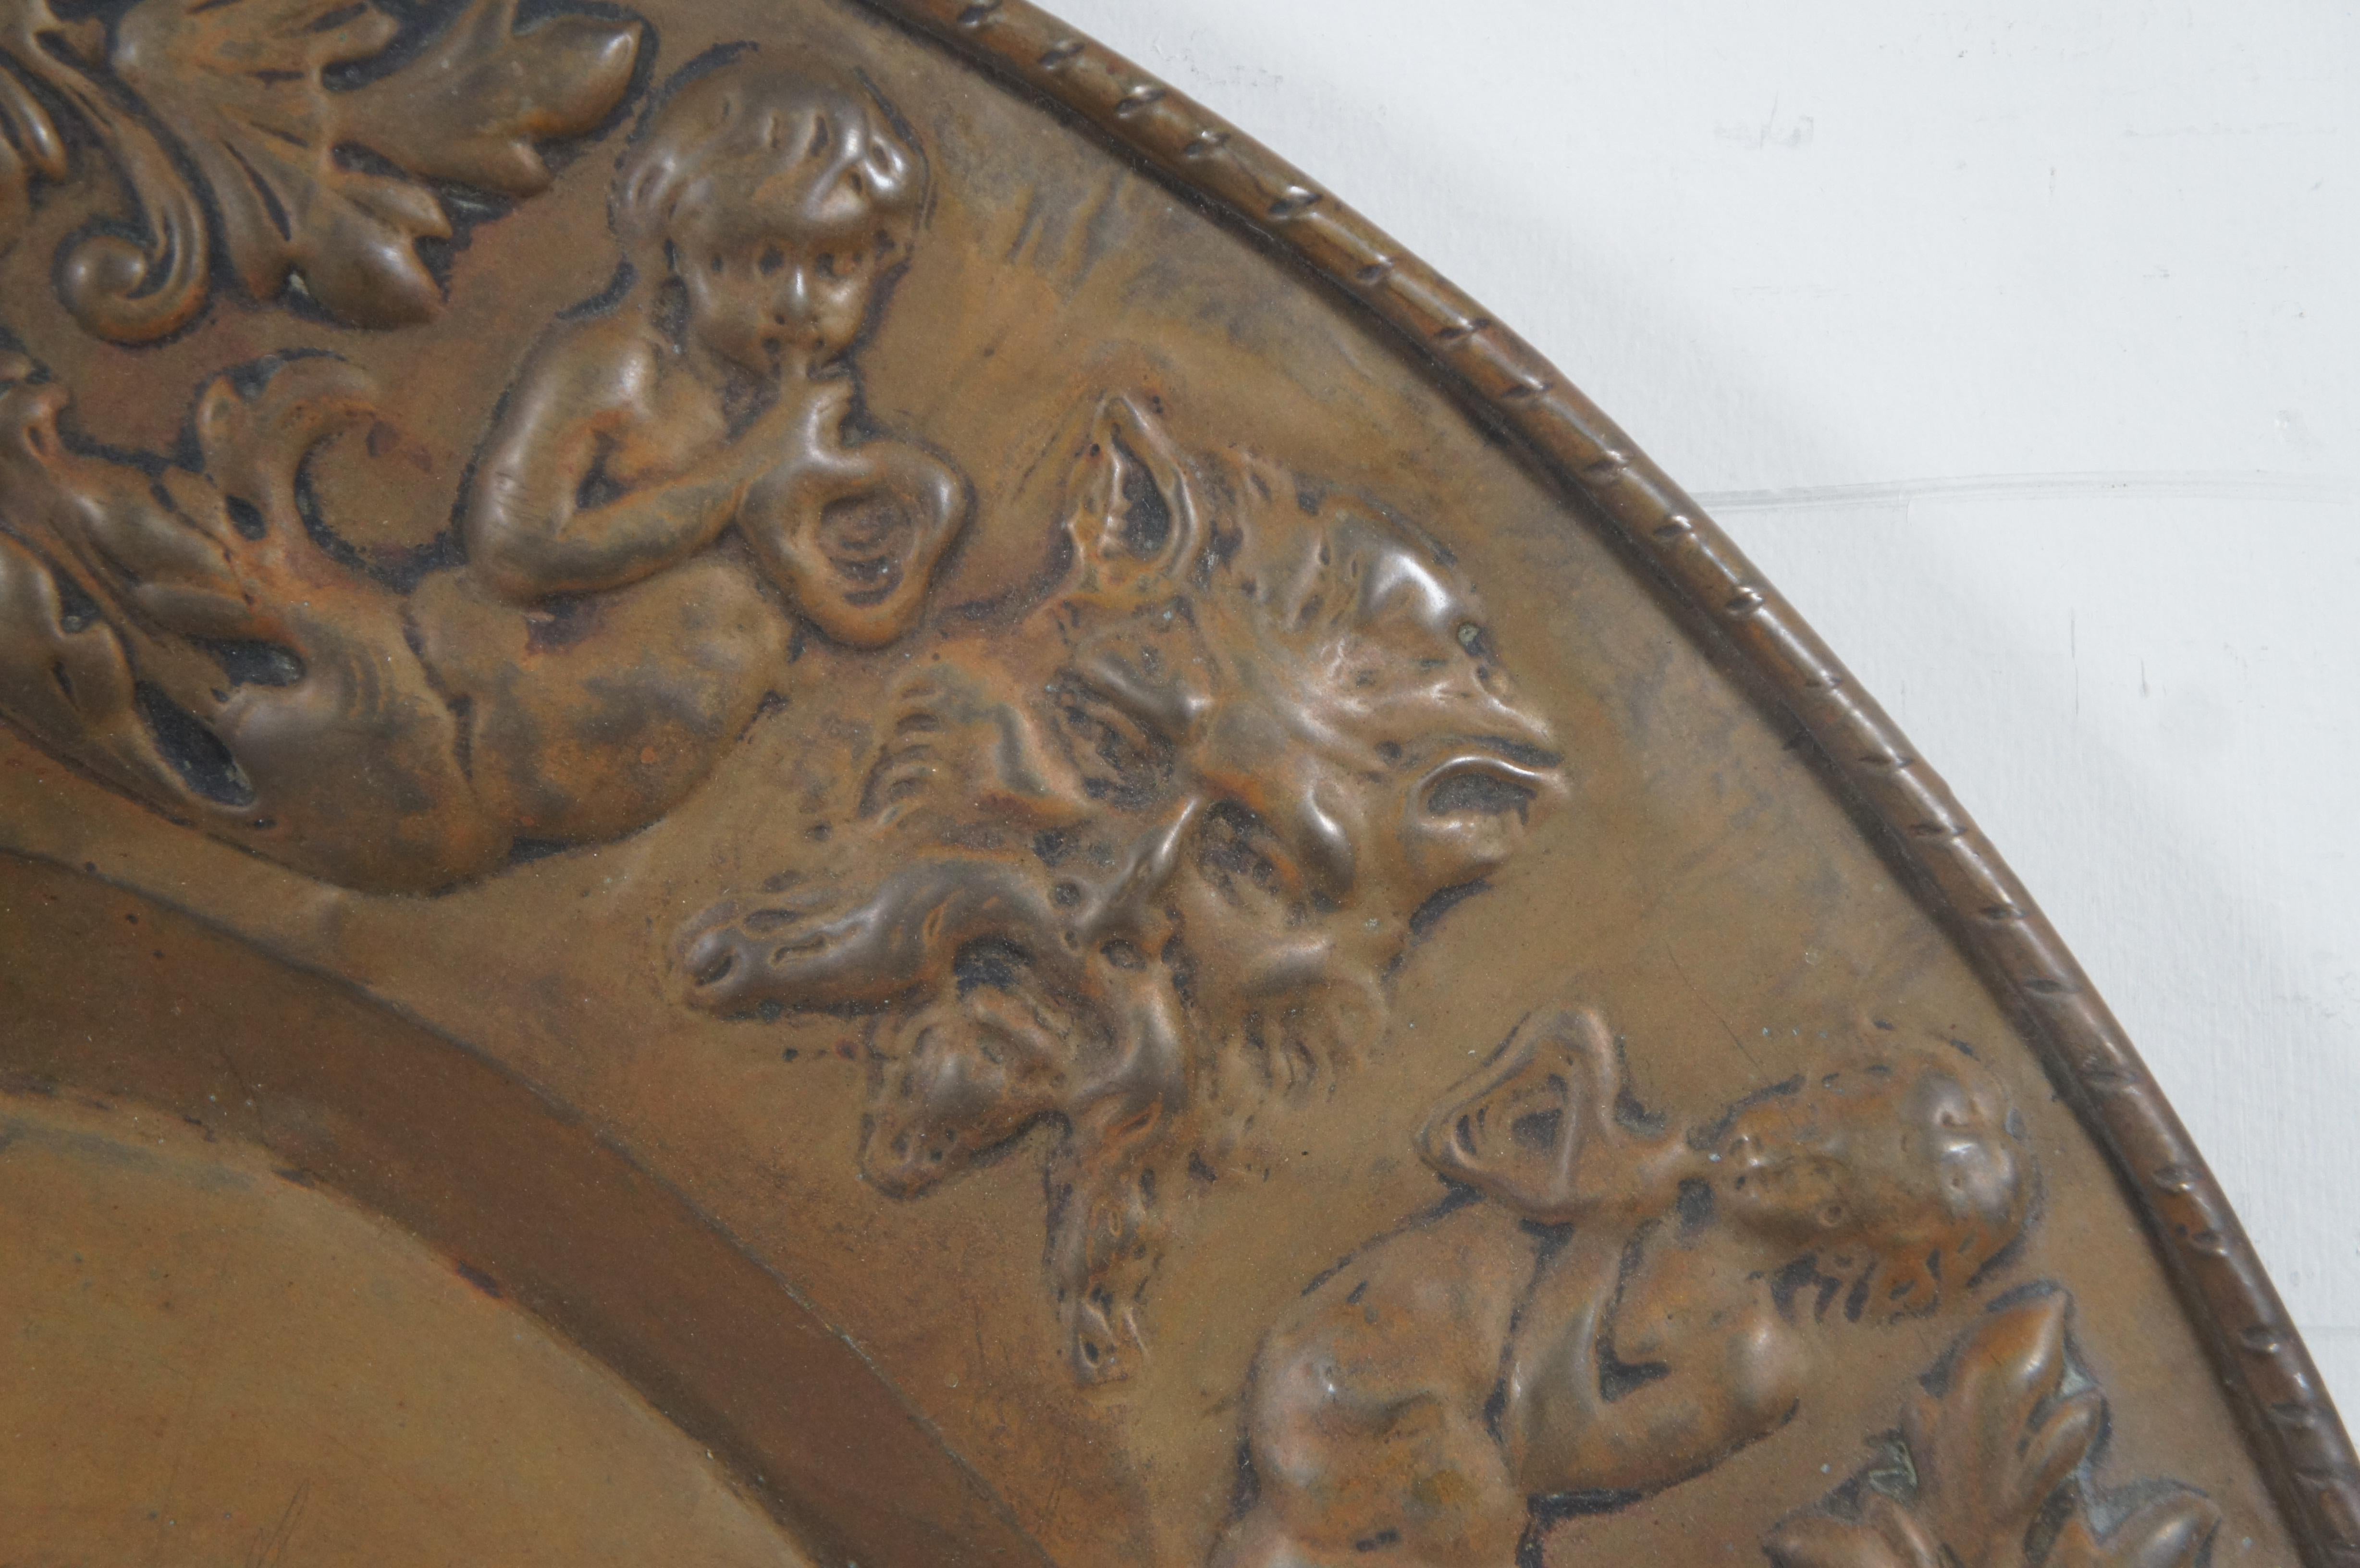 Antique Copper Embossed Tavern Scene Repousse Wall Plaque Charger Platter 24